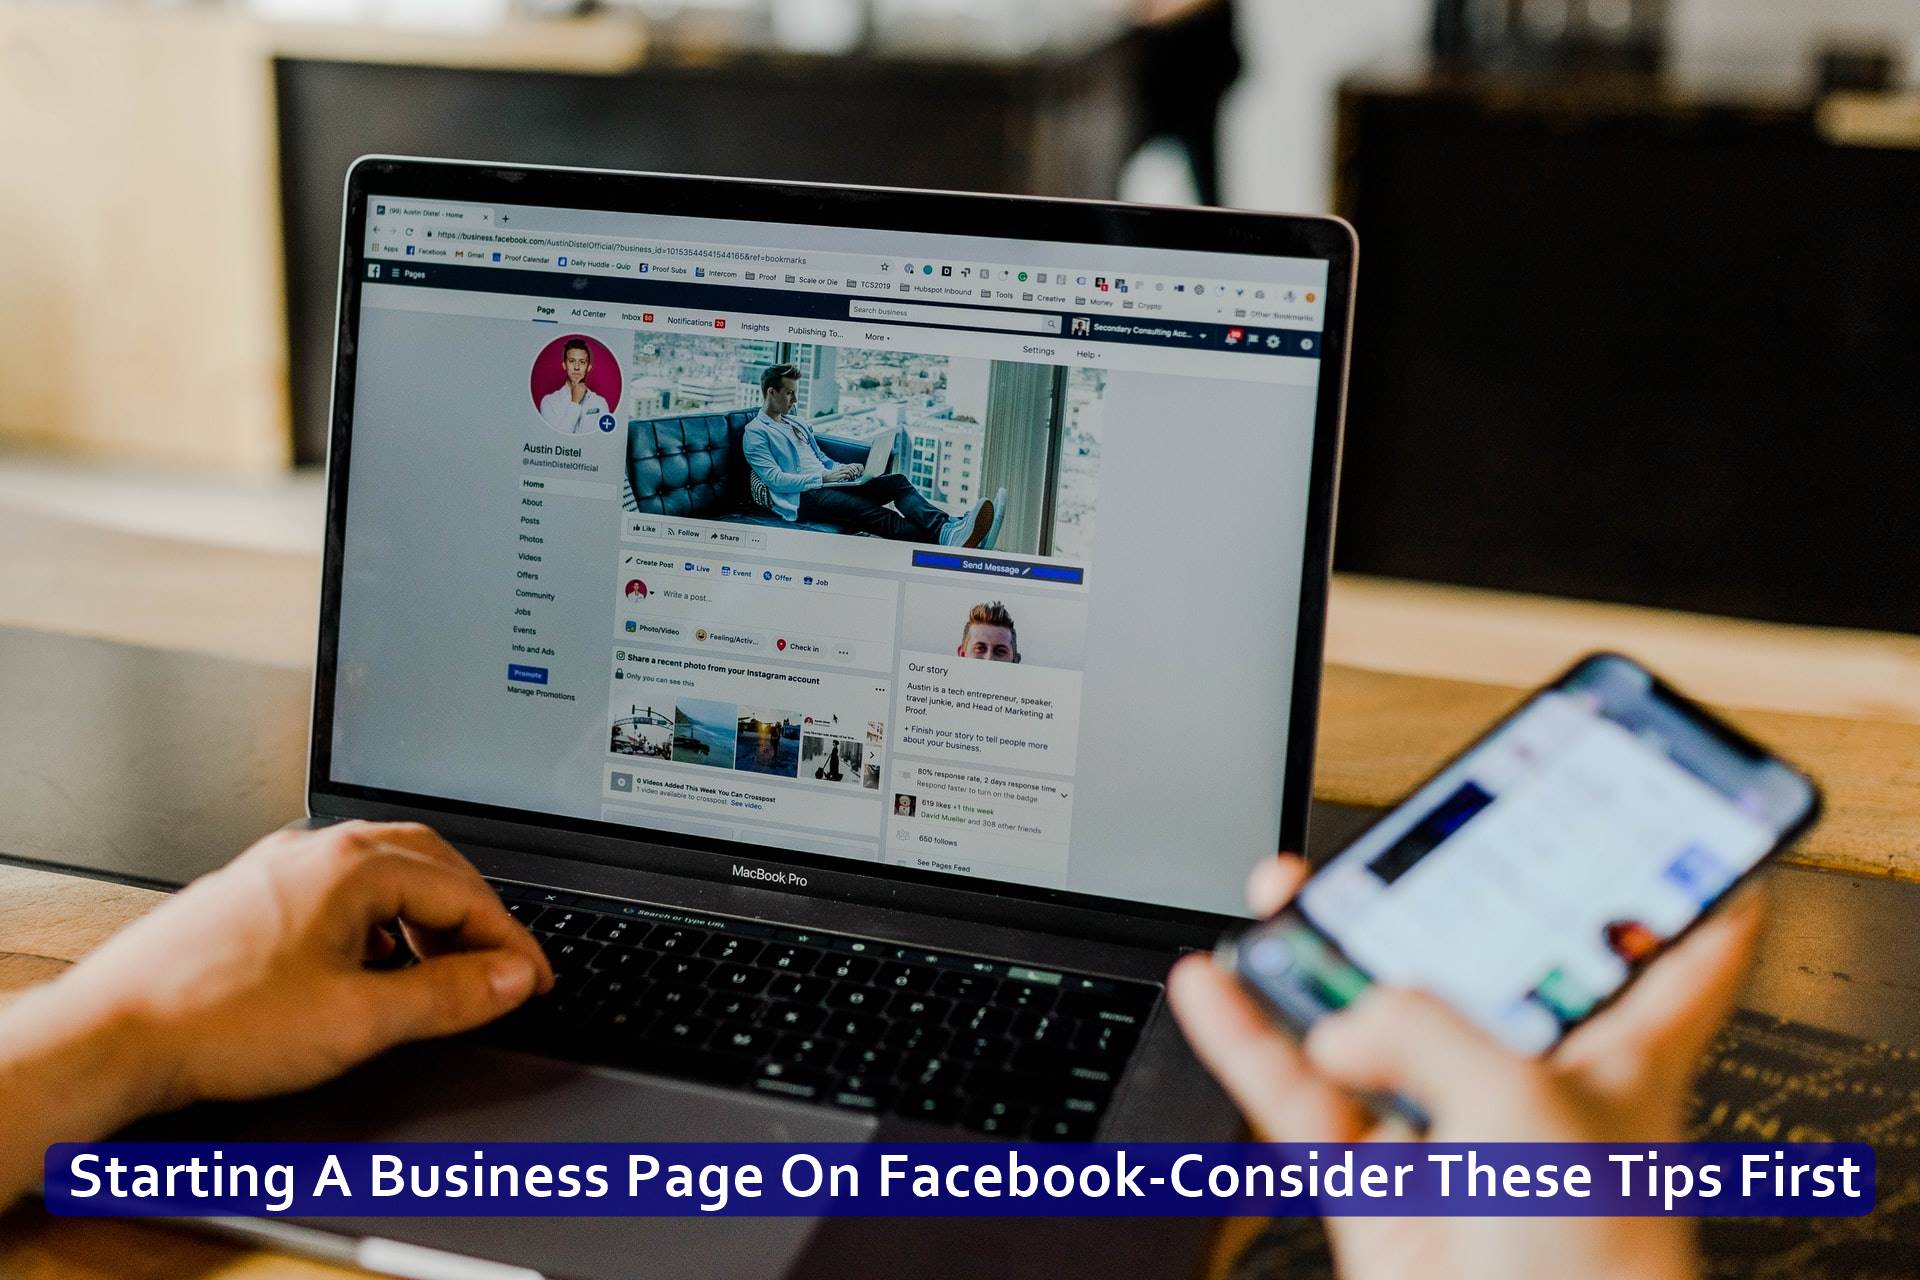 Starting A Business Page On Facebook-Consider These Tips First